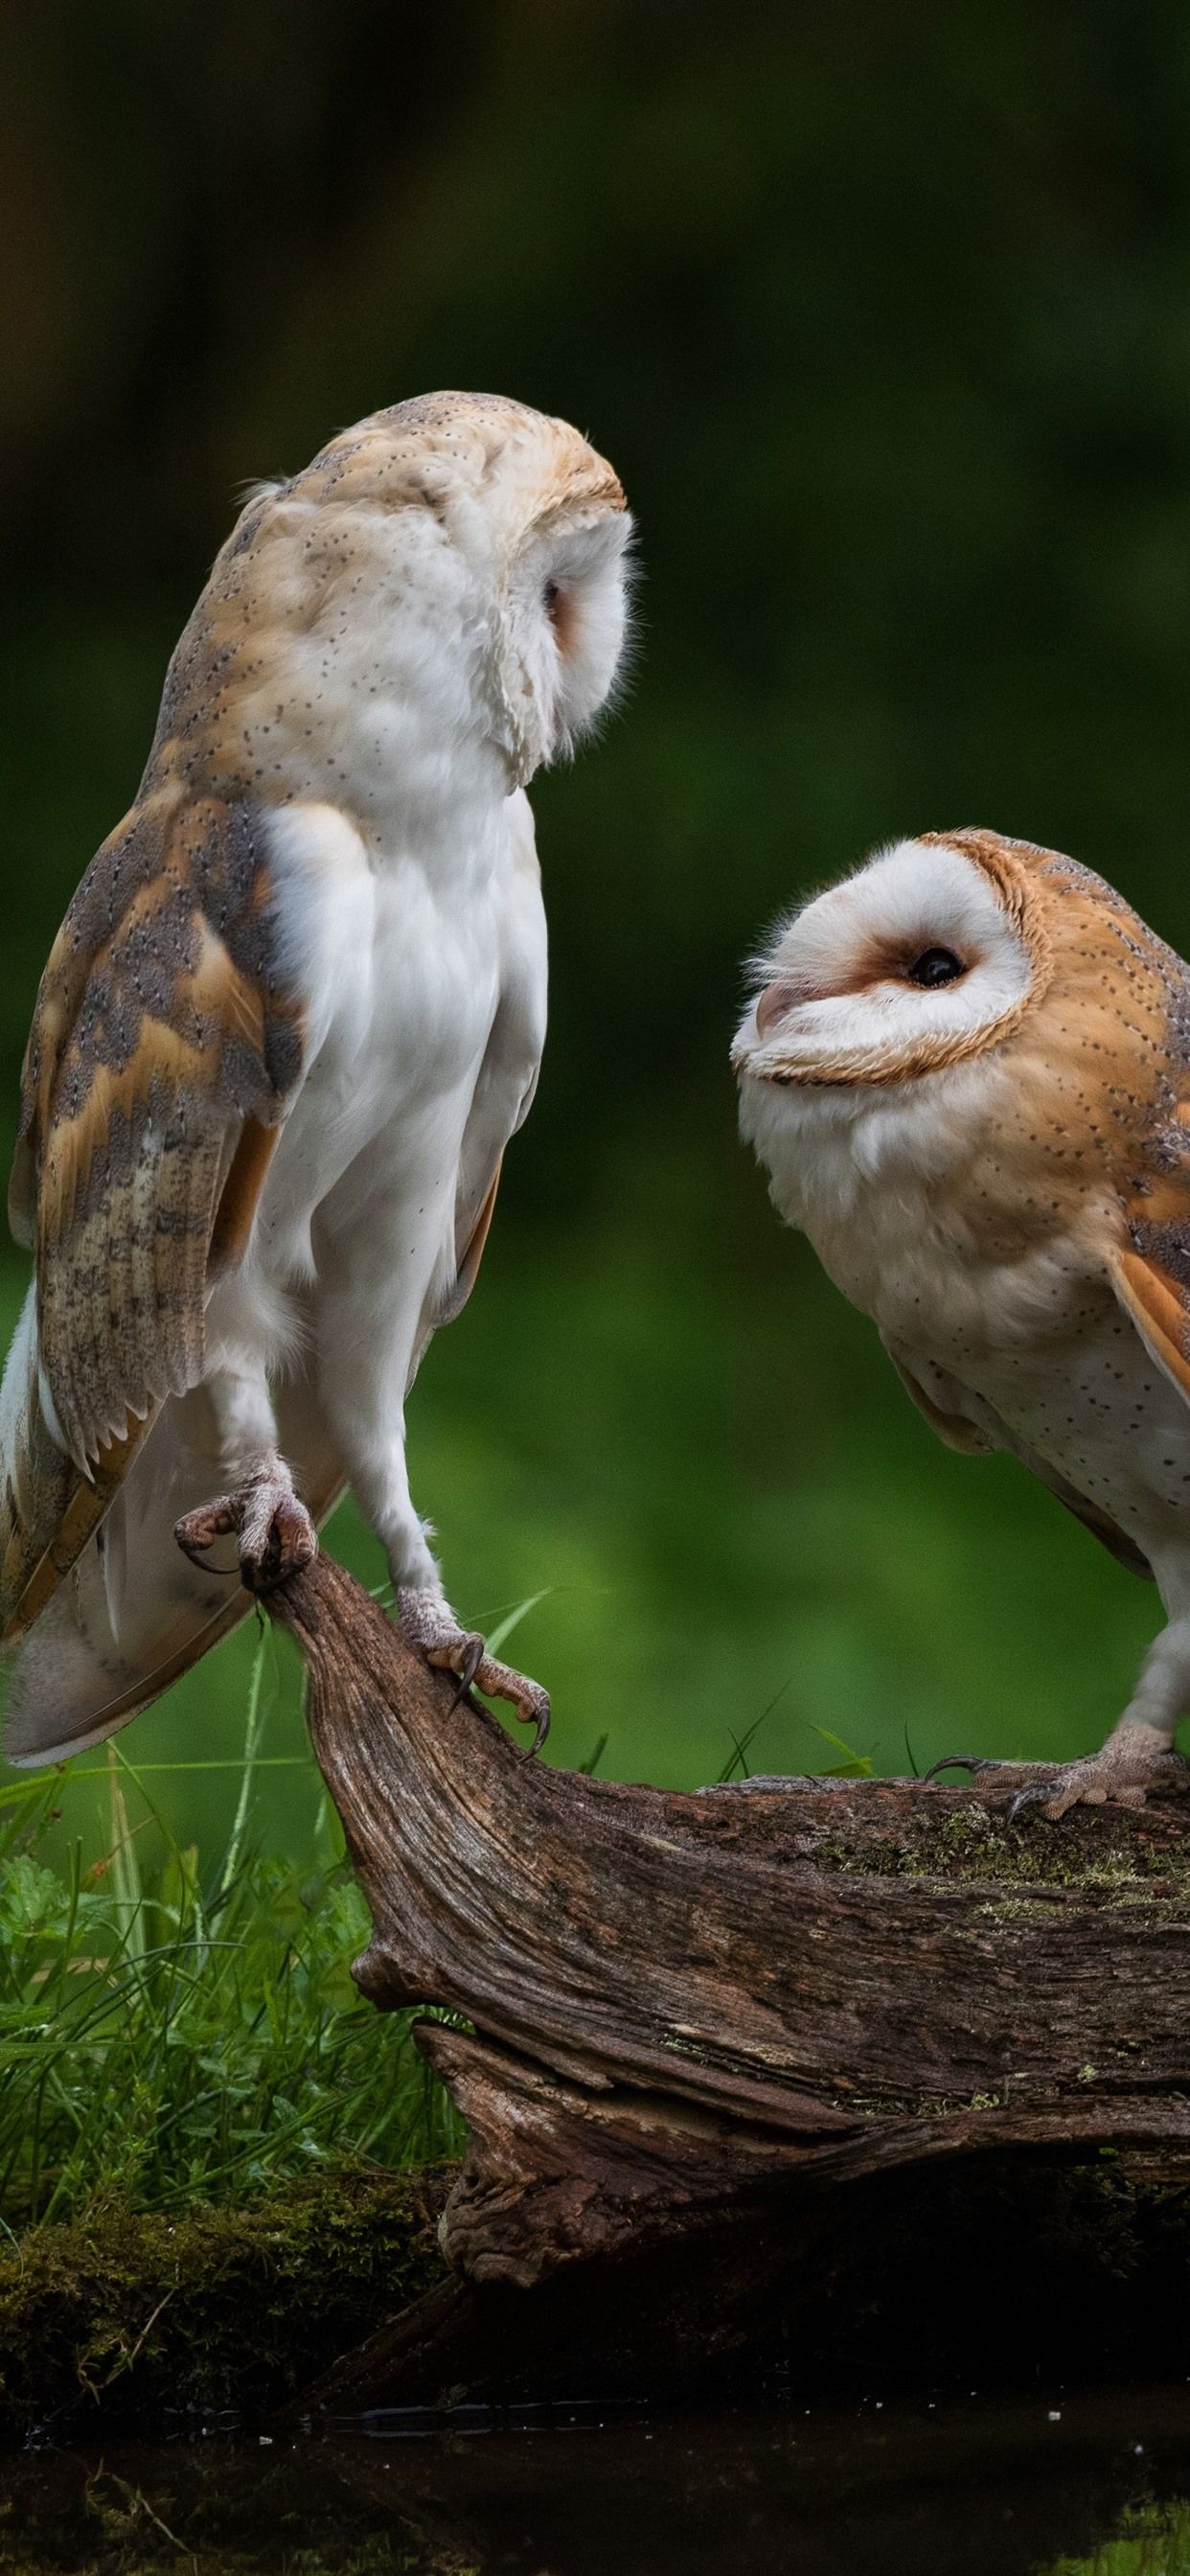 Wallpaper Two cute owls, birds 5120x2880 UHD 5K Picture, Image